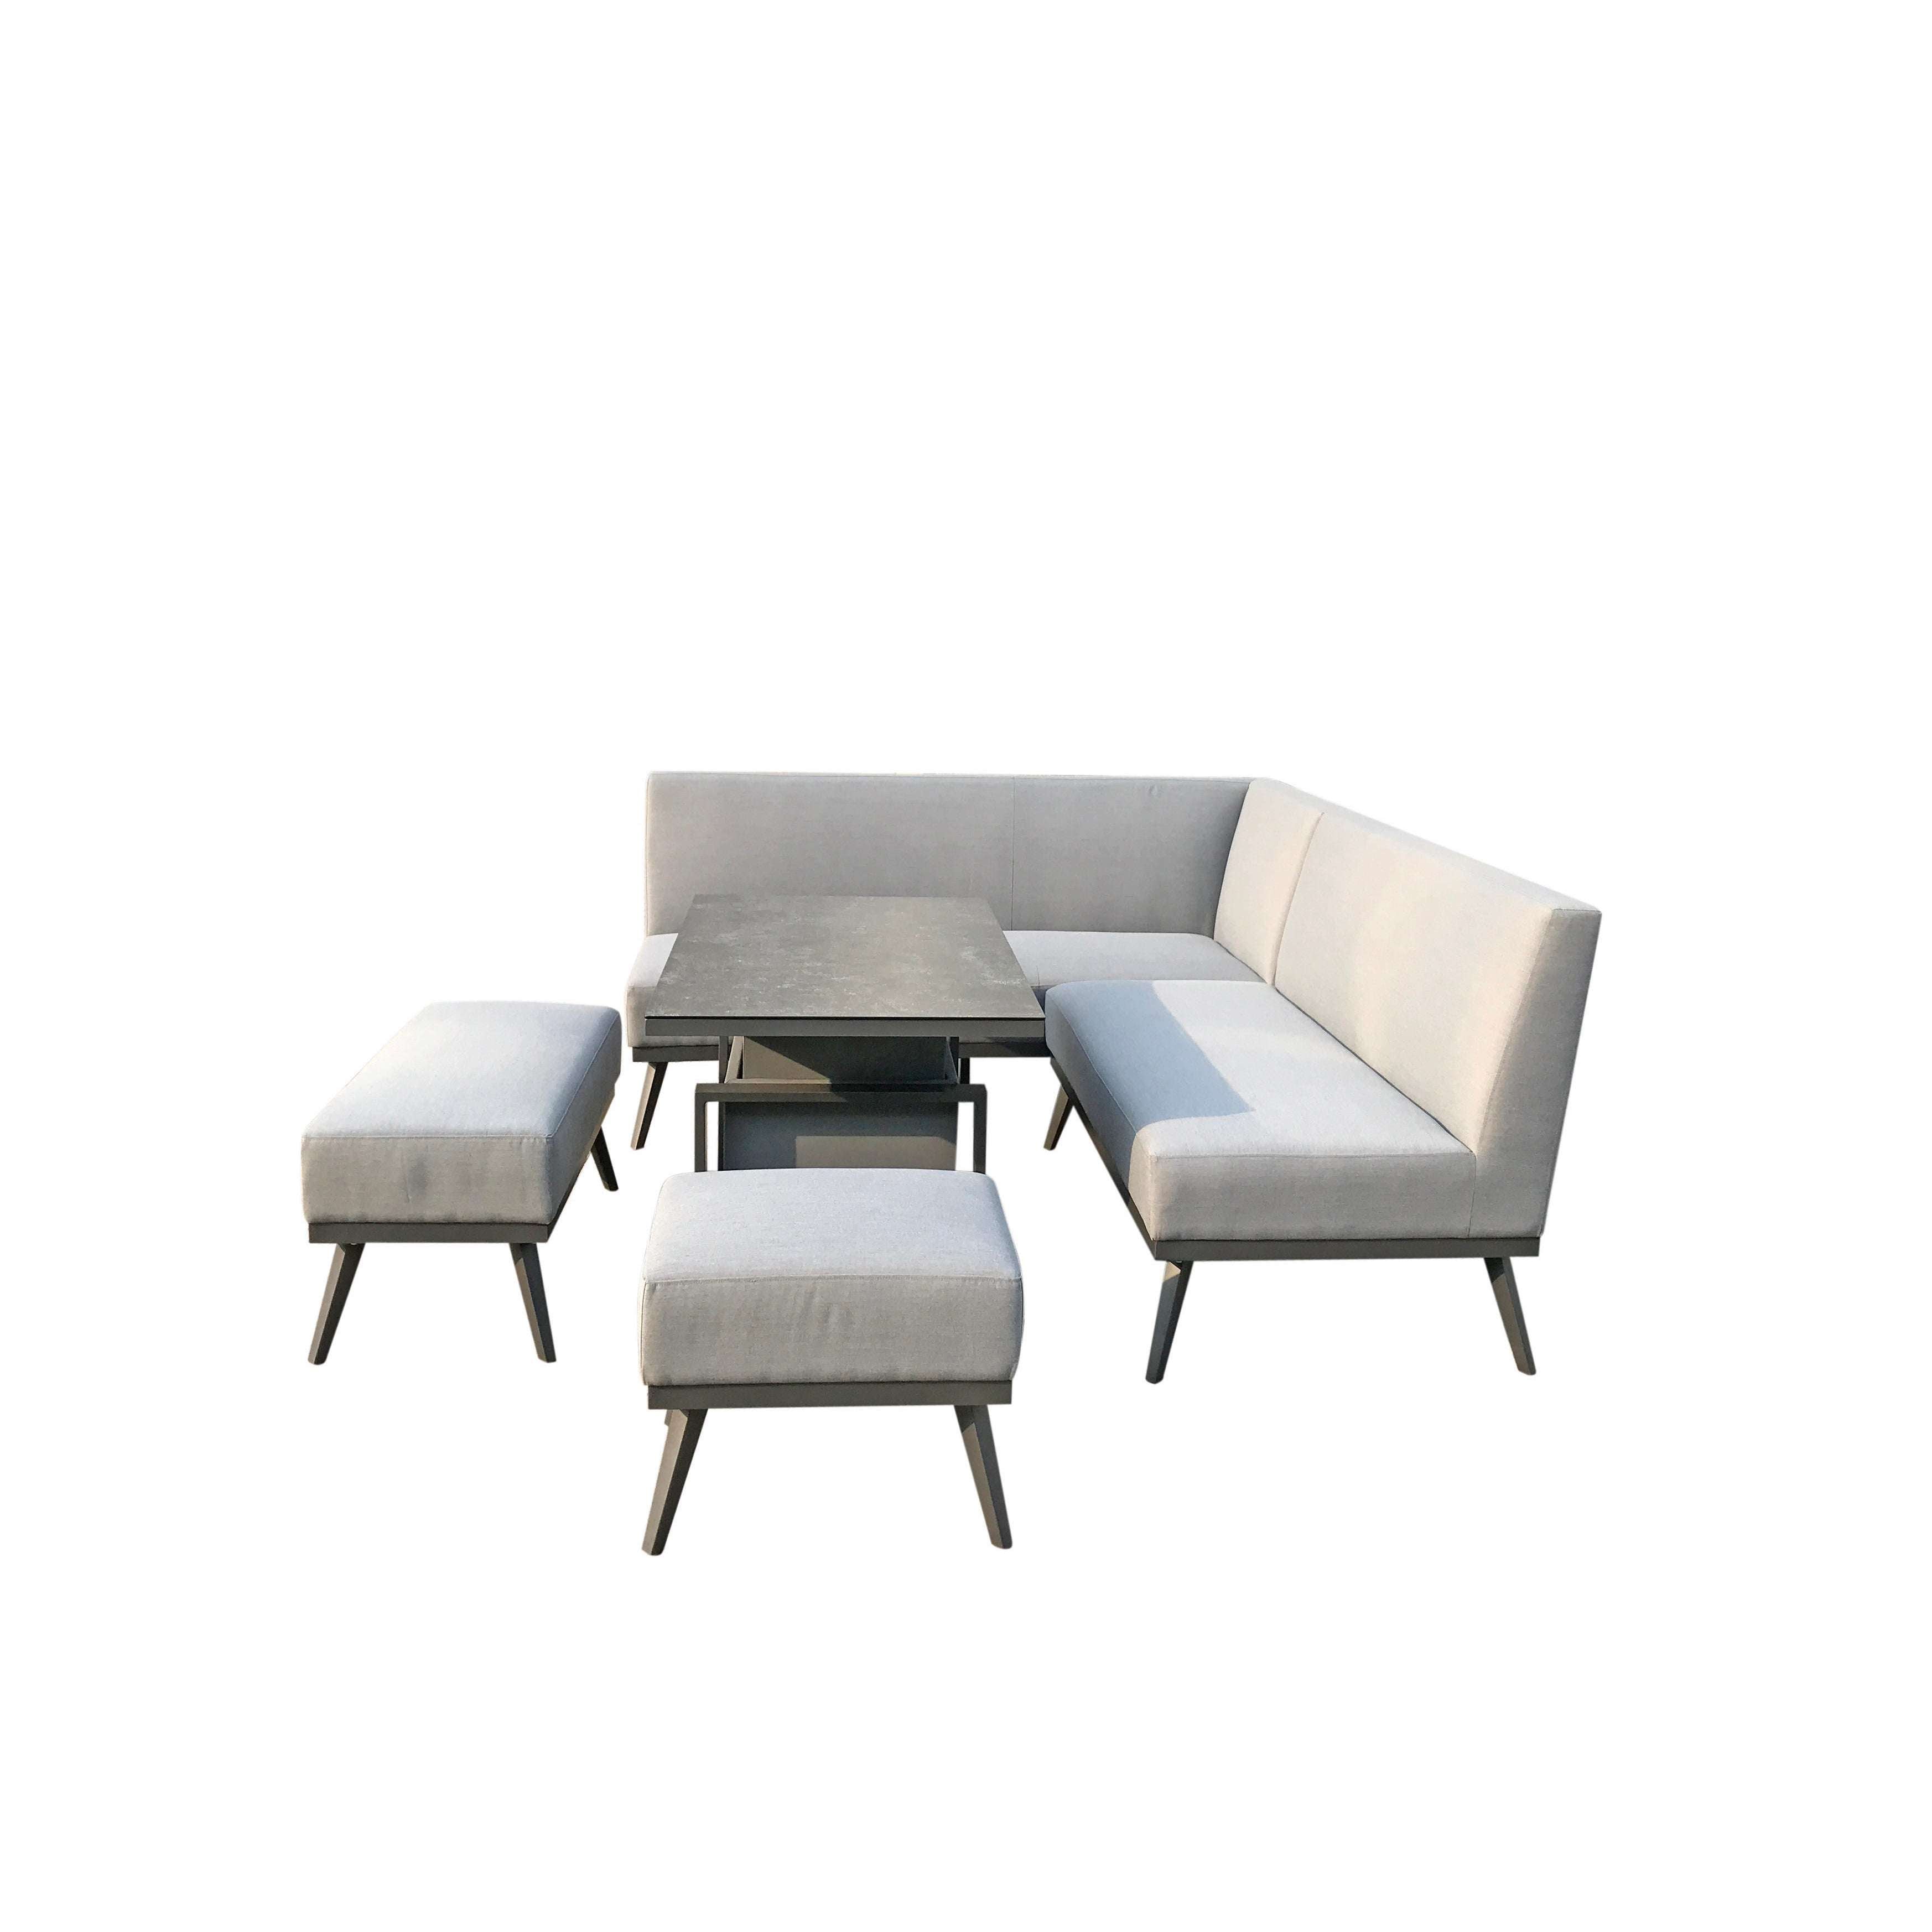 Exceptional Garden:Signature Weave Kimmie Sofa Set with Gas Lift Table